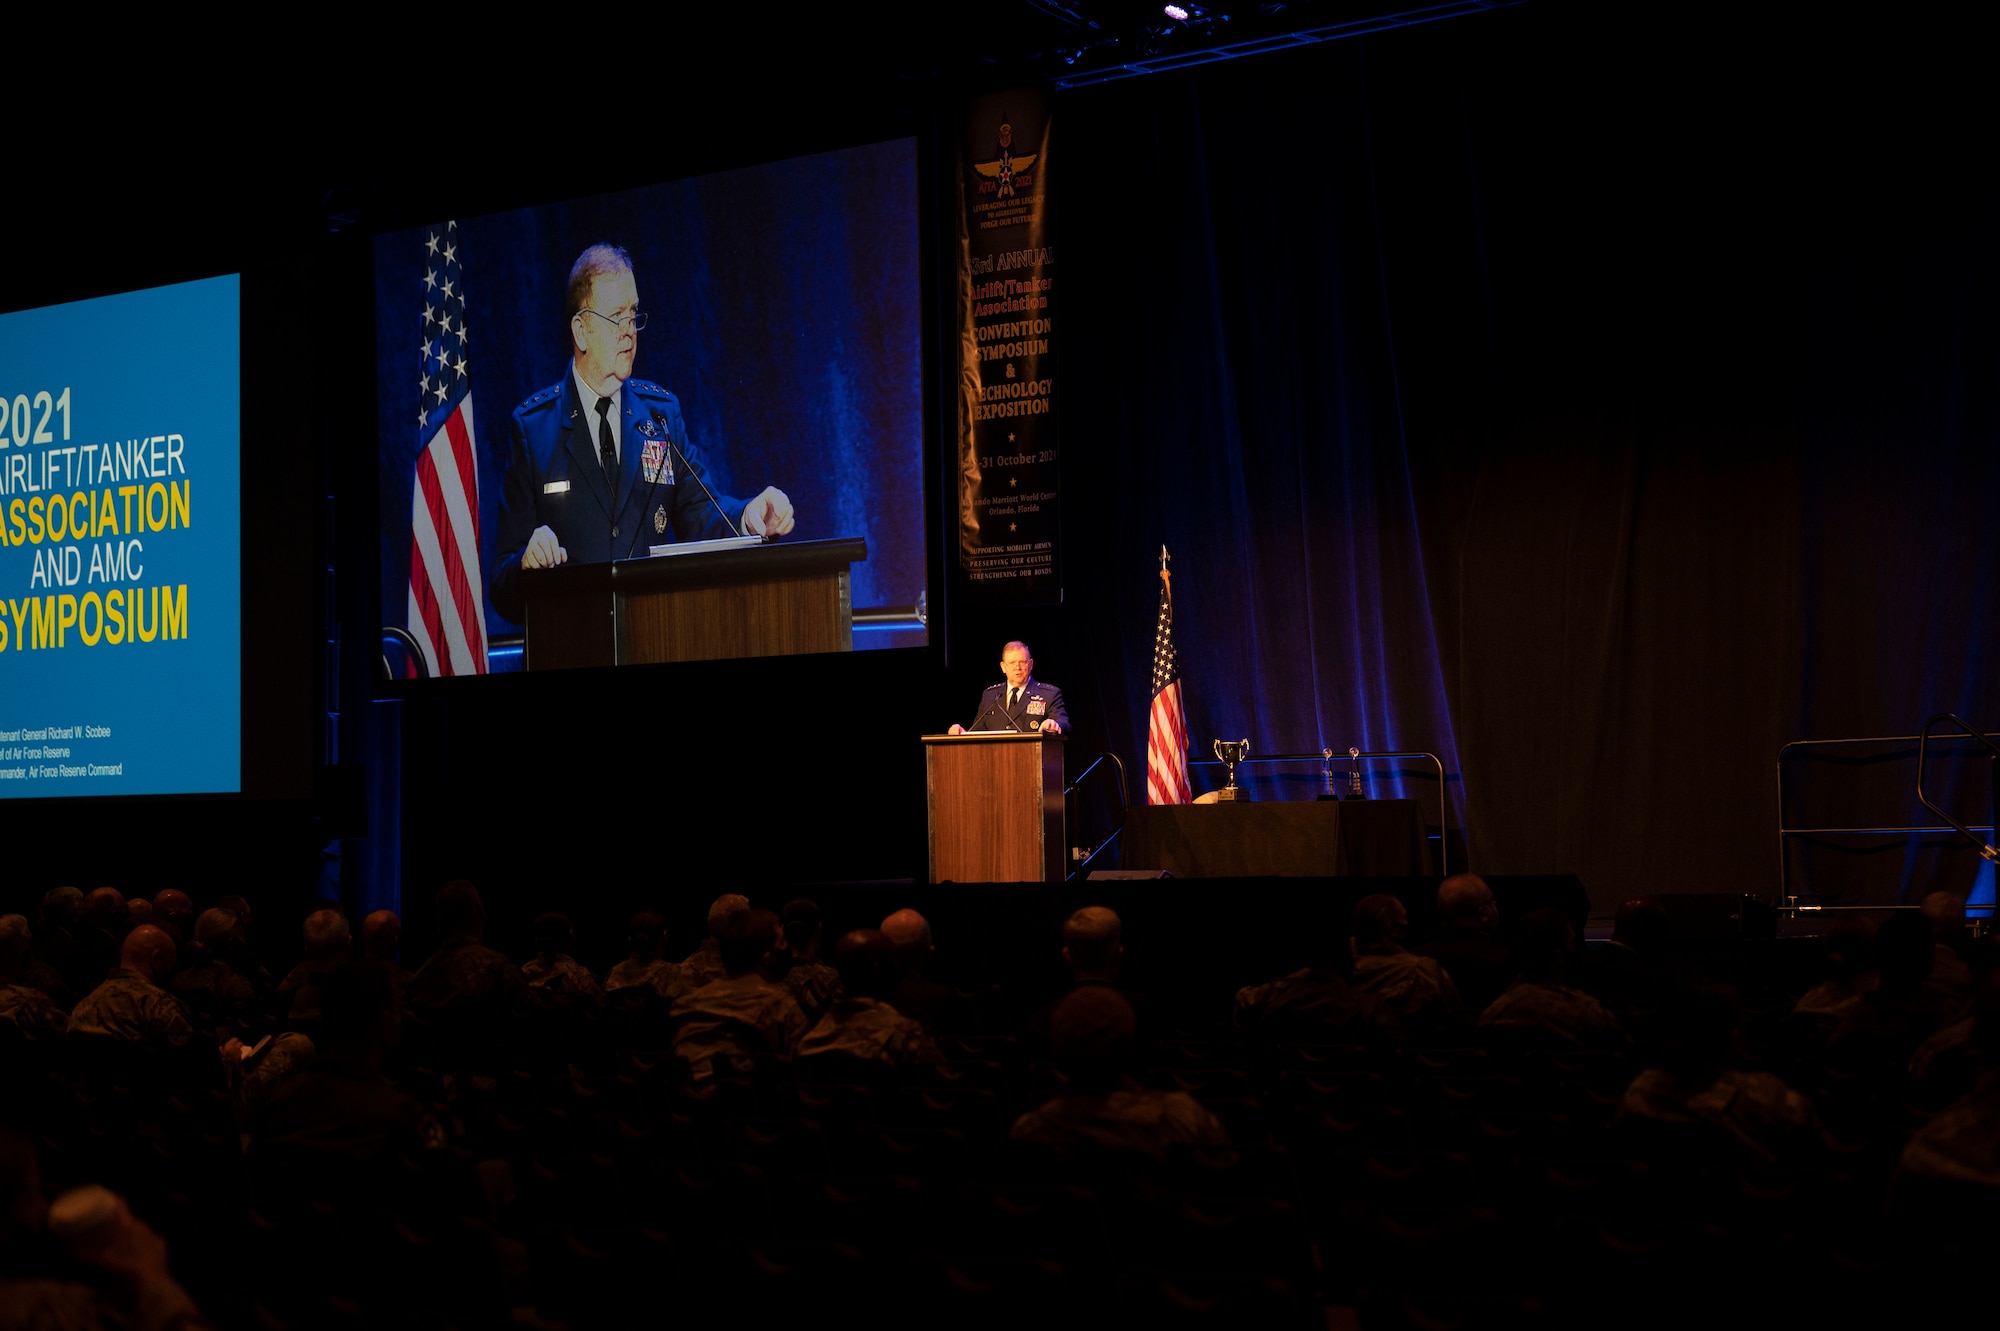 Photo of Lt. Gen. Richard Scobee, chief of the Air Force Reserve and commander of the Air Force Reserve Command, delivering a keynote speech at the 53rd Airlift/Tanker Association Annual Convention, Symposium and Technology Exposition on Oct. 30, in Orlando, Florida.